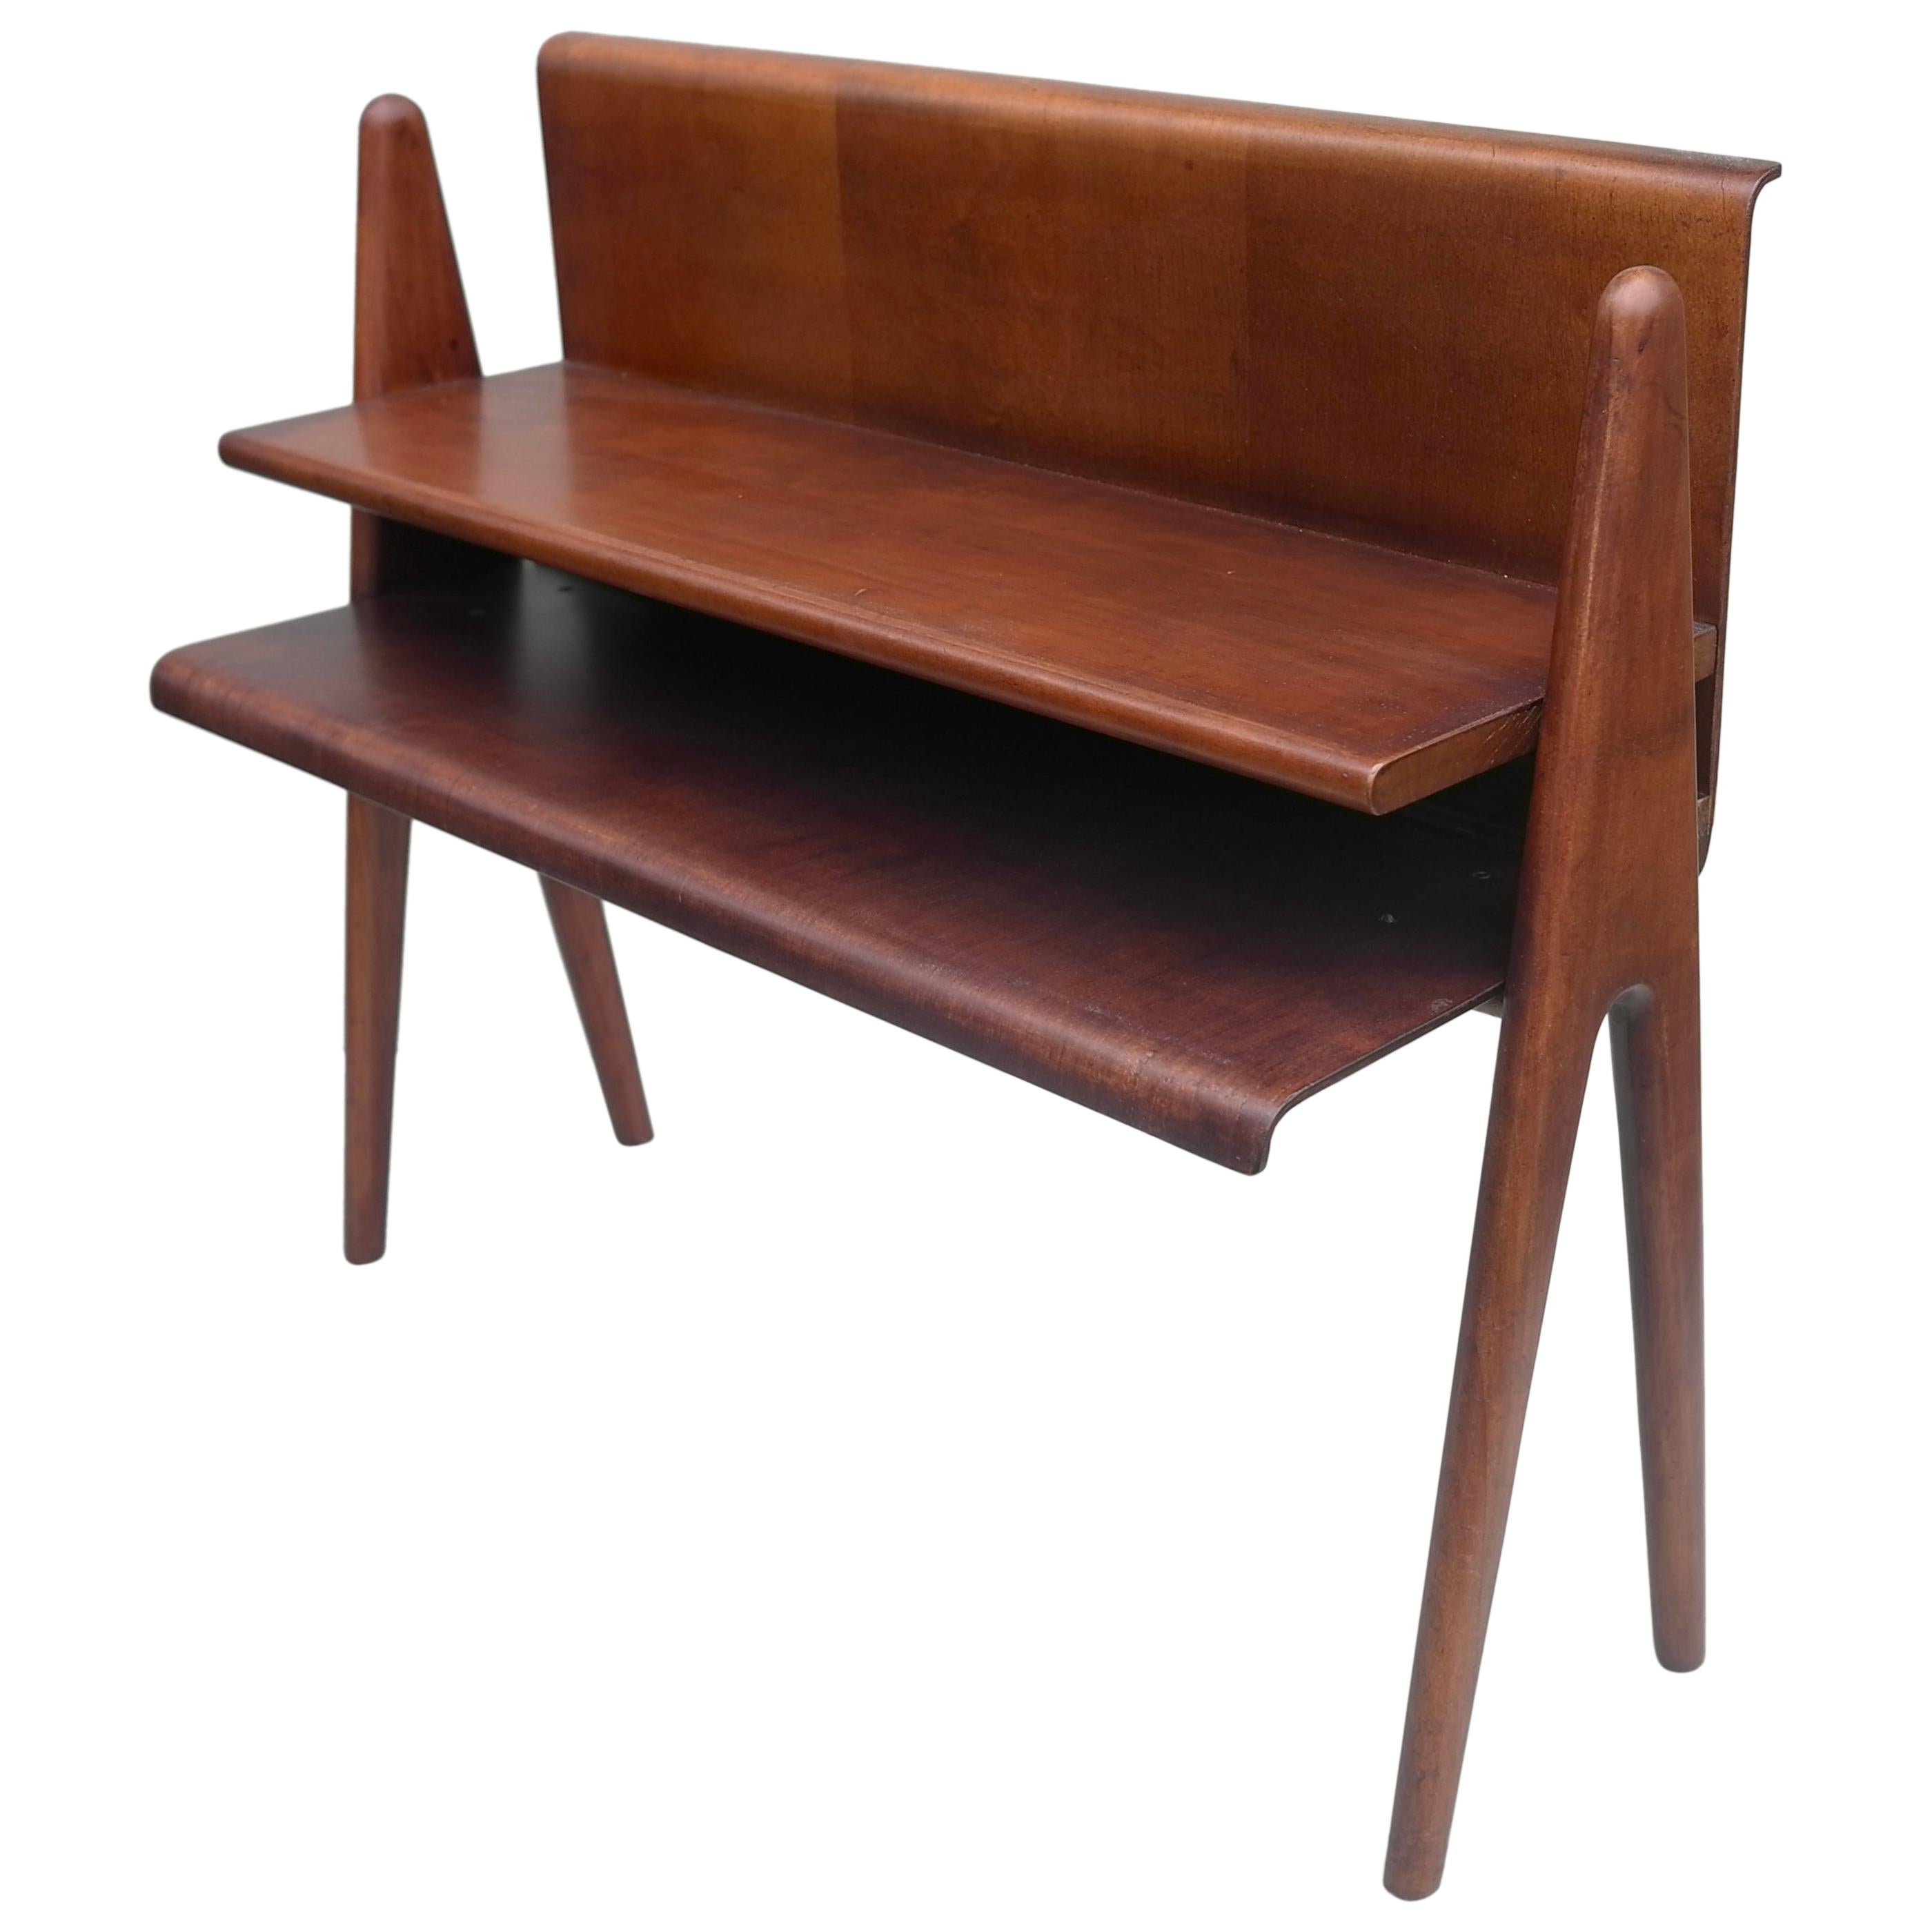 Cesare Lacca Curved Walnut Plywood Side Table or Book Stand, Italy, 1950s